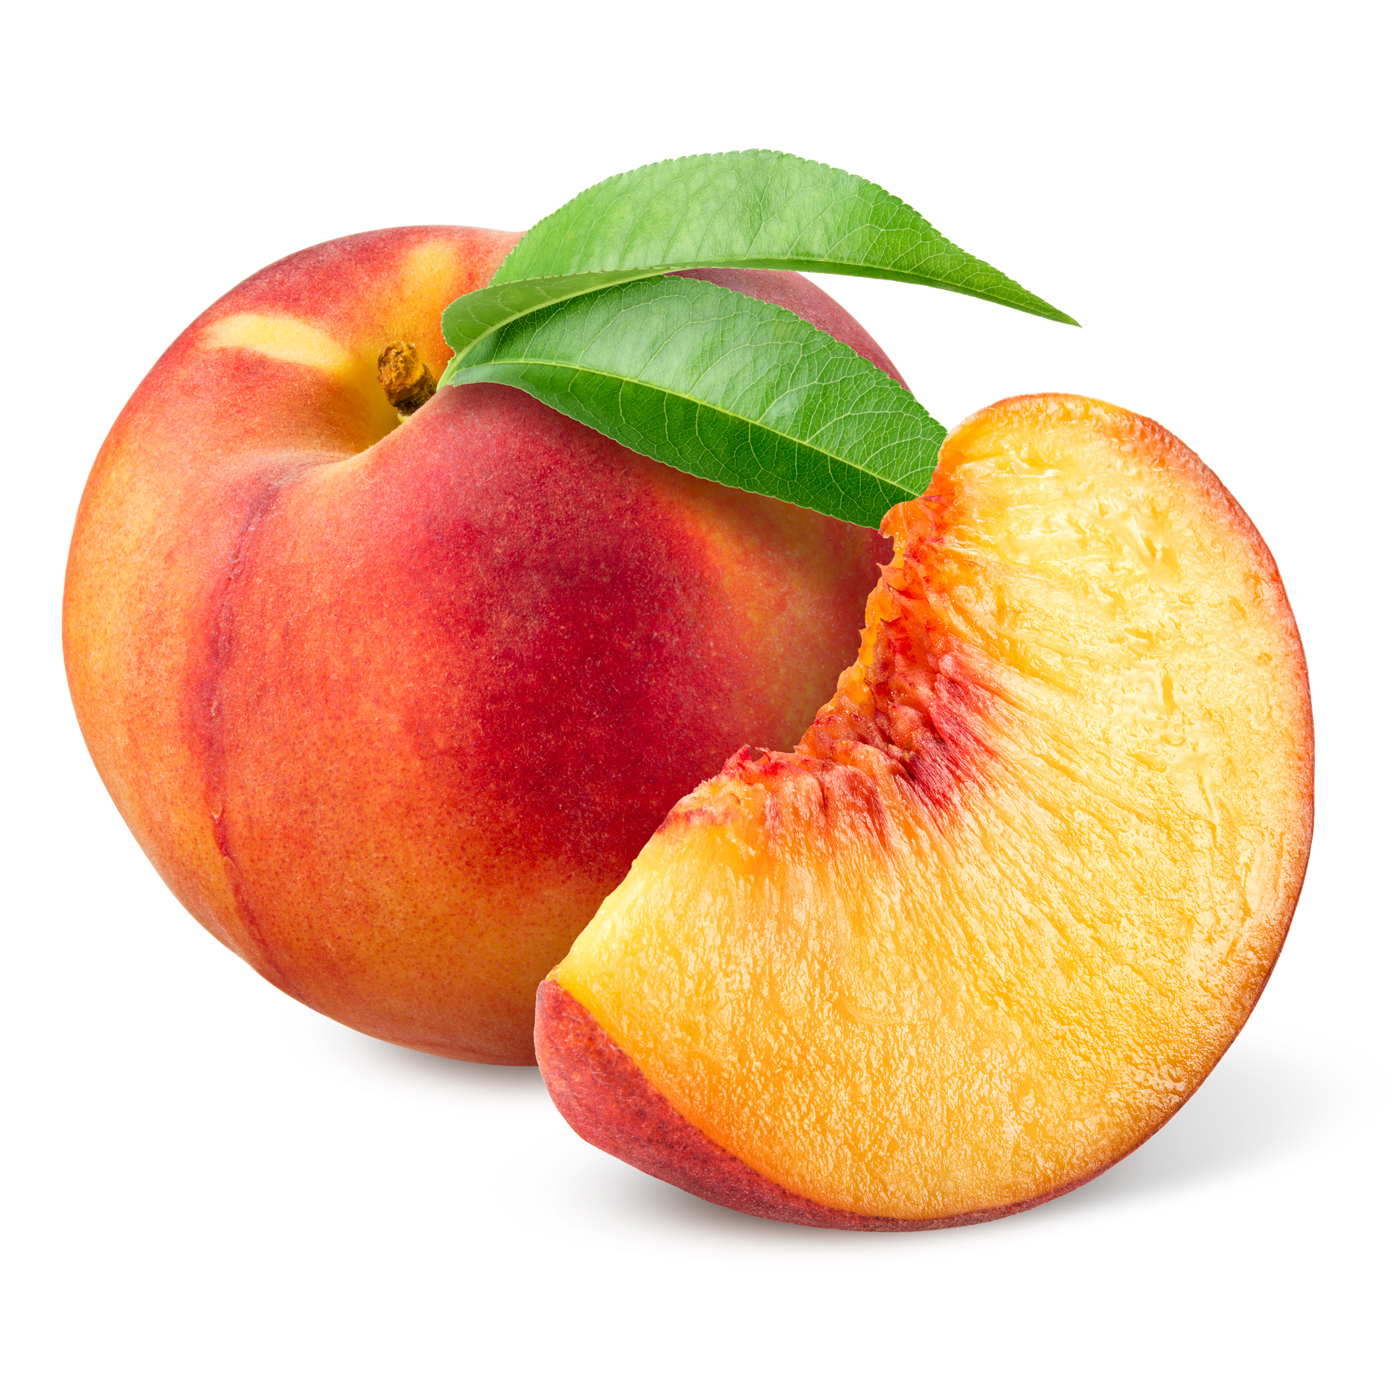 Yellow peach whole and slice image